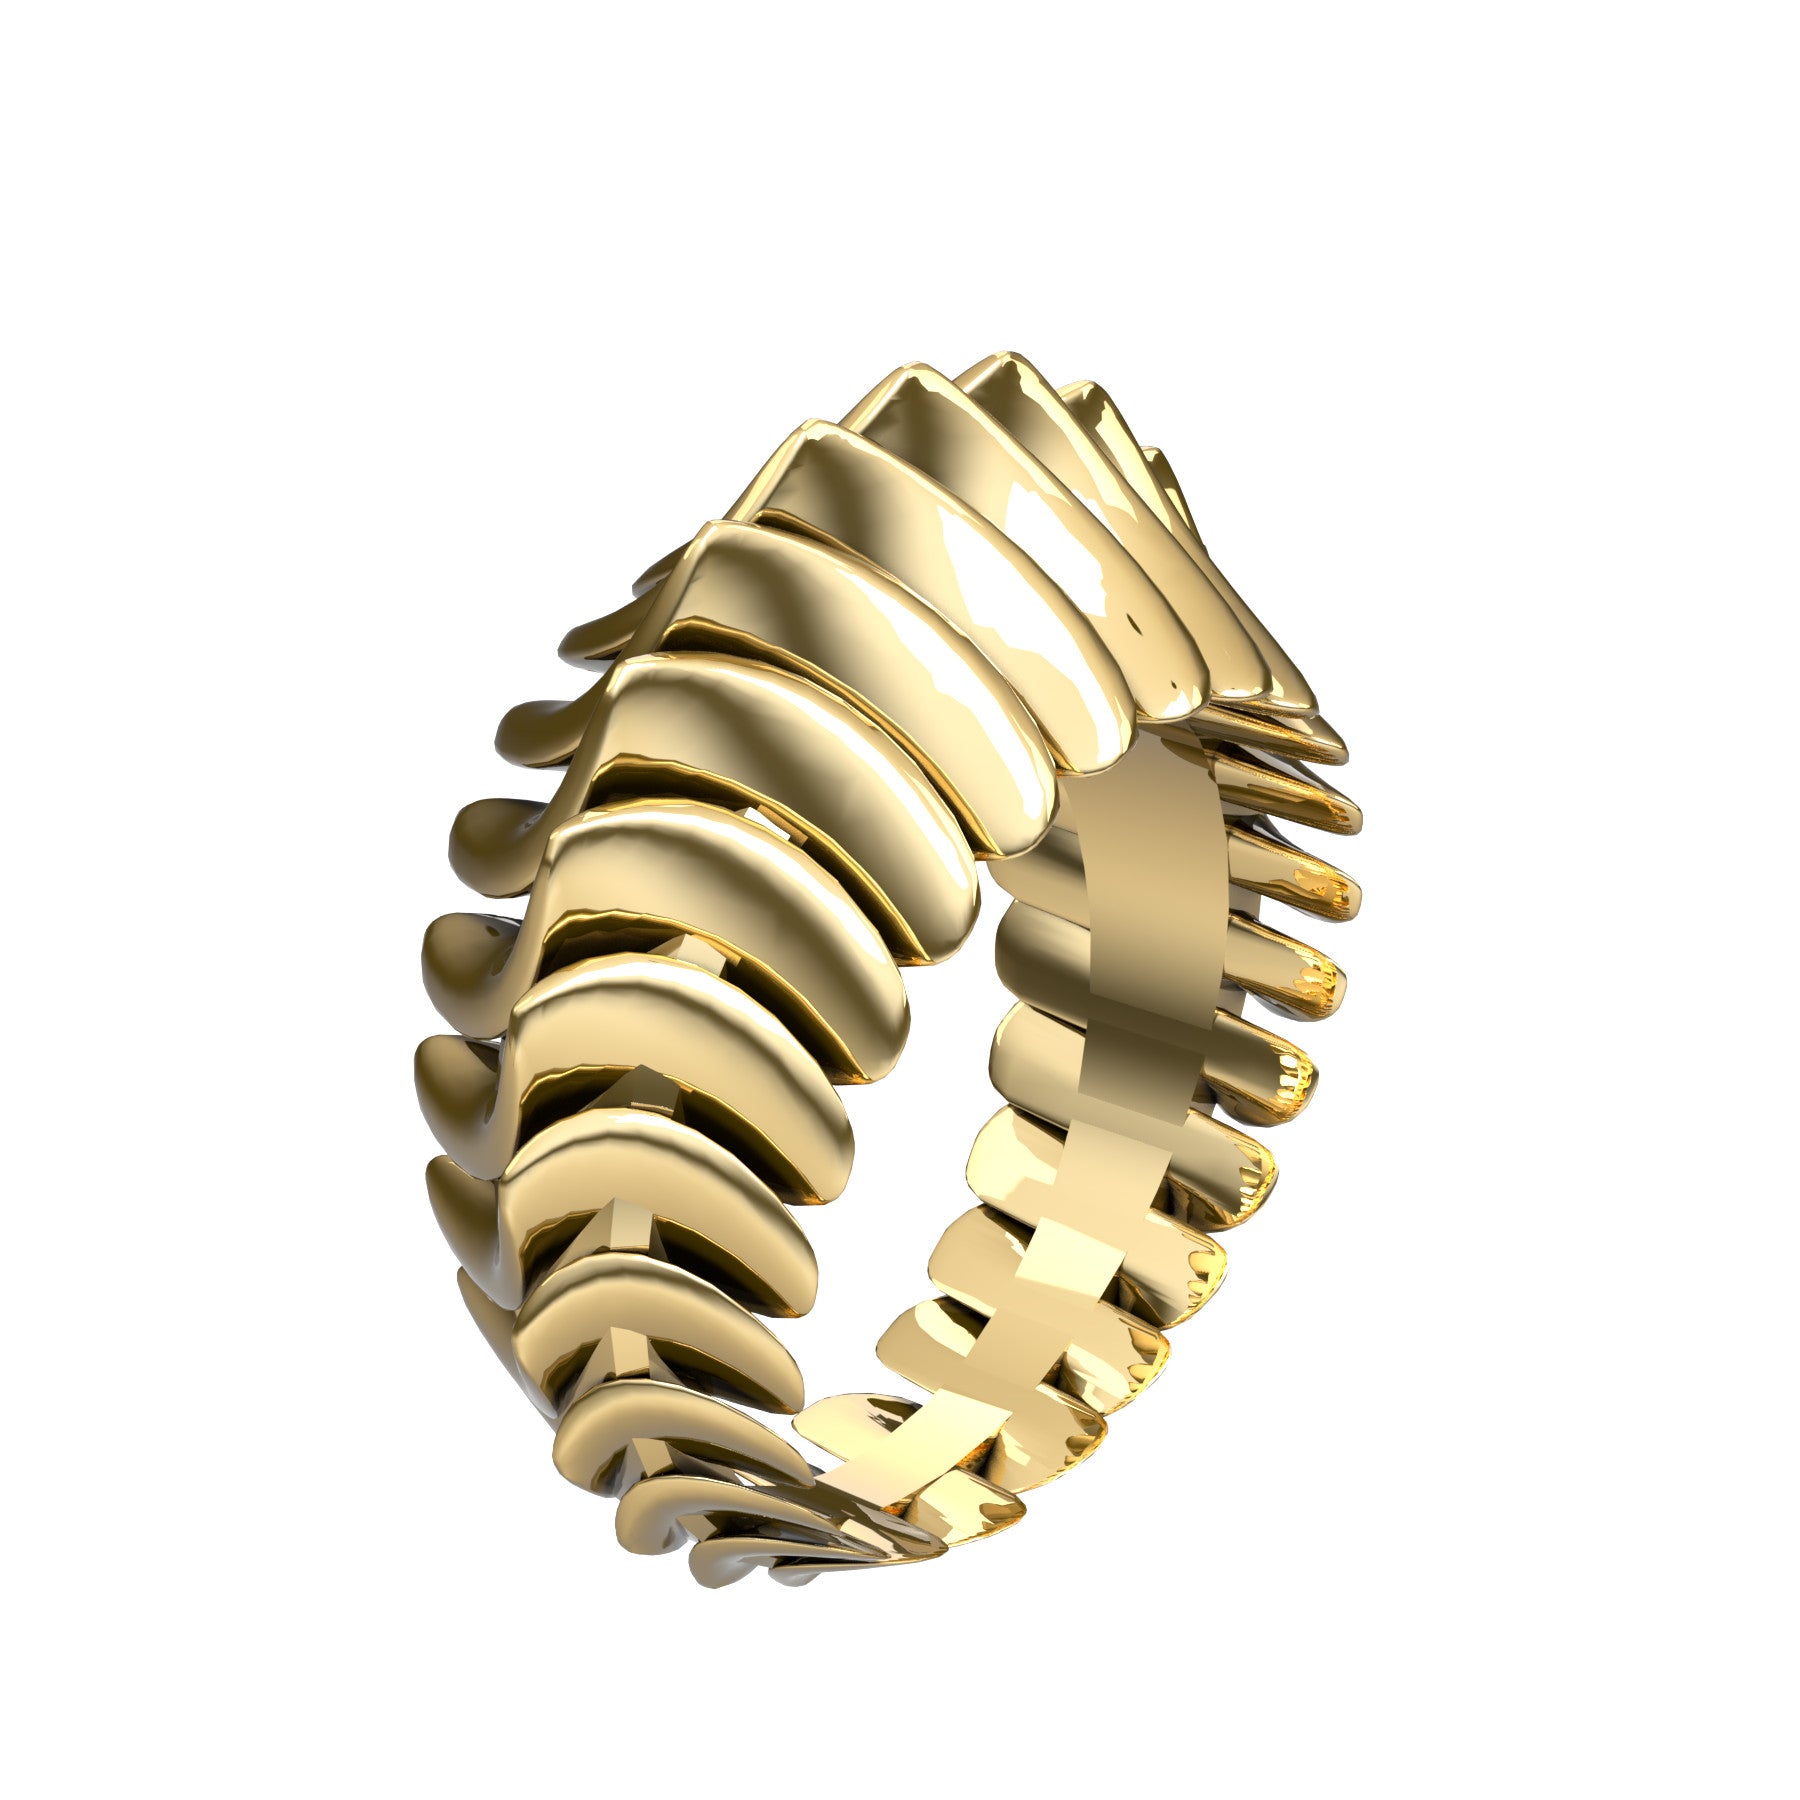 backbone ring, 18 K yellow gold, weight about 9,2 g. (0.32 oz), width 12,0 mm max